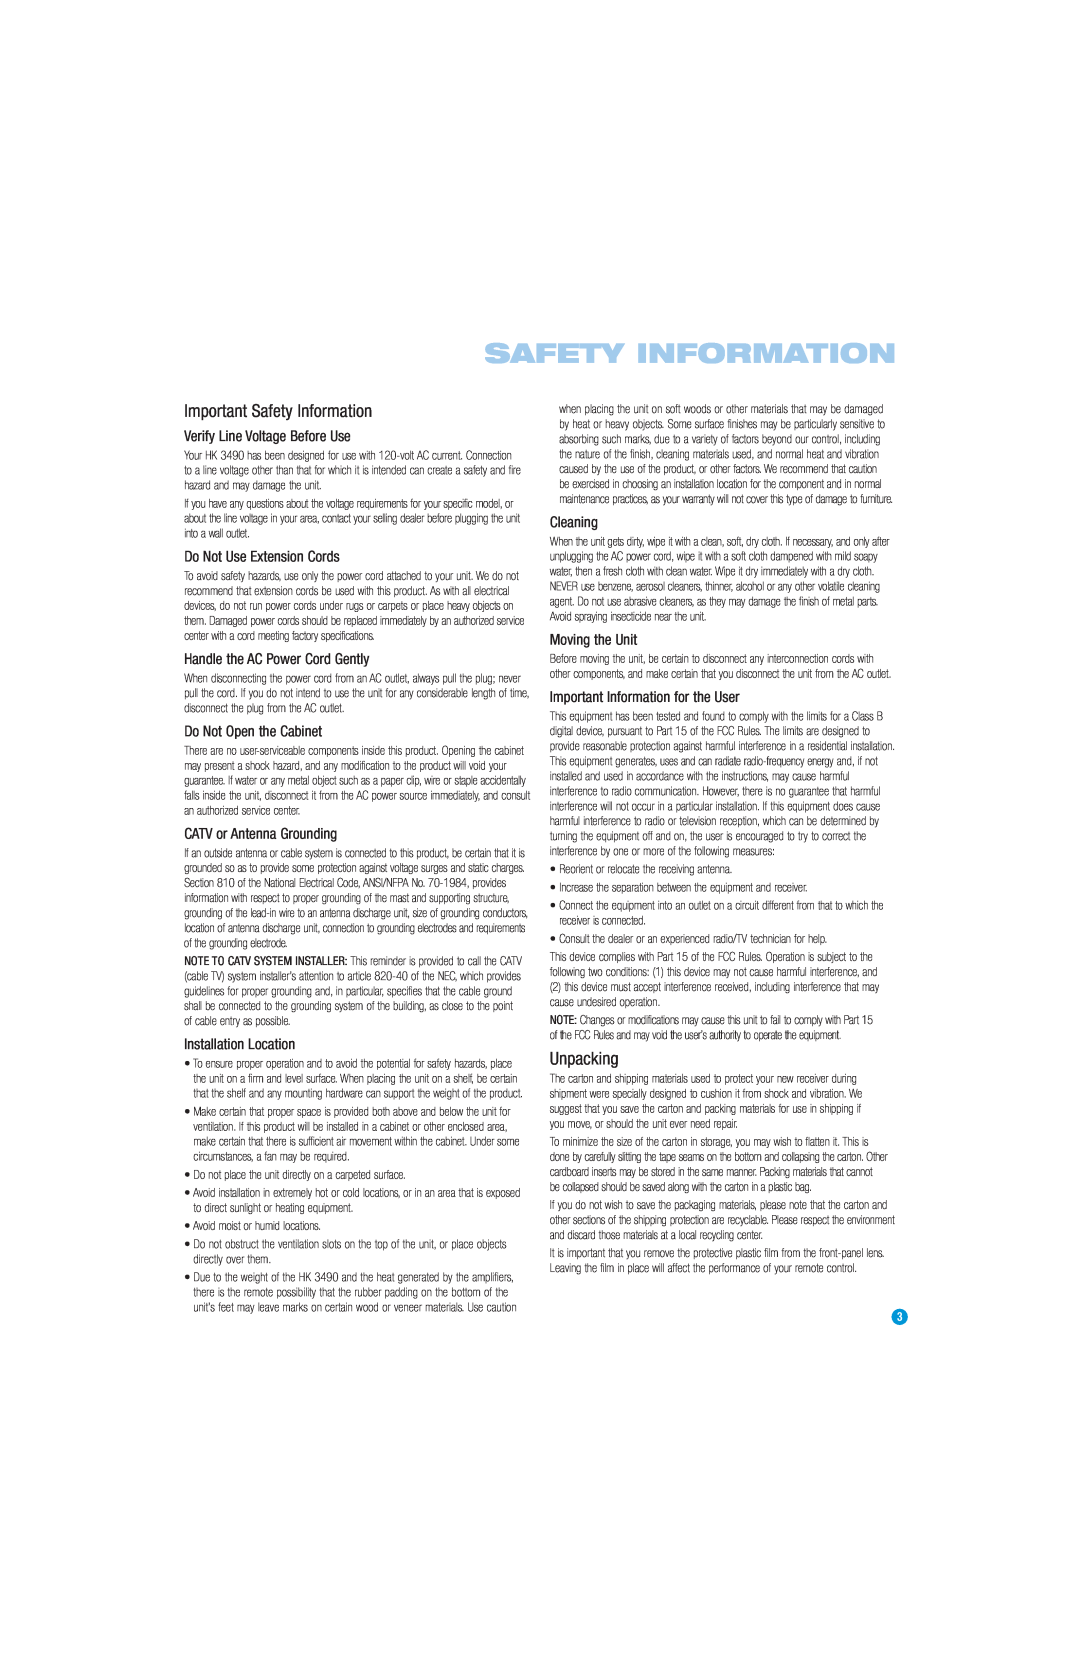 Harman-Kardon HK3490 Important Safety Information, Unpacking, Verify Line Voltage Before Use, Do Not Use Extension Cords 